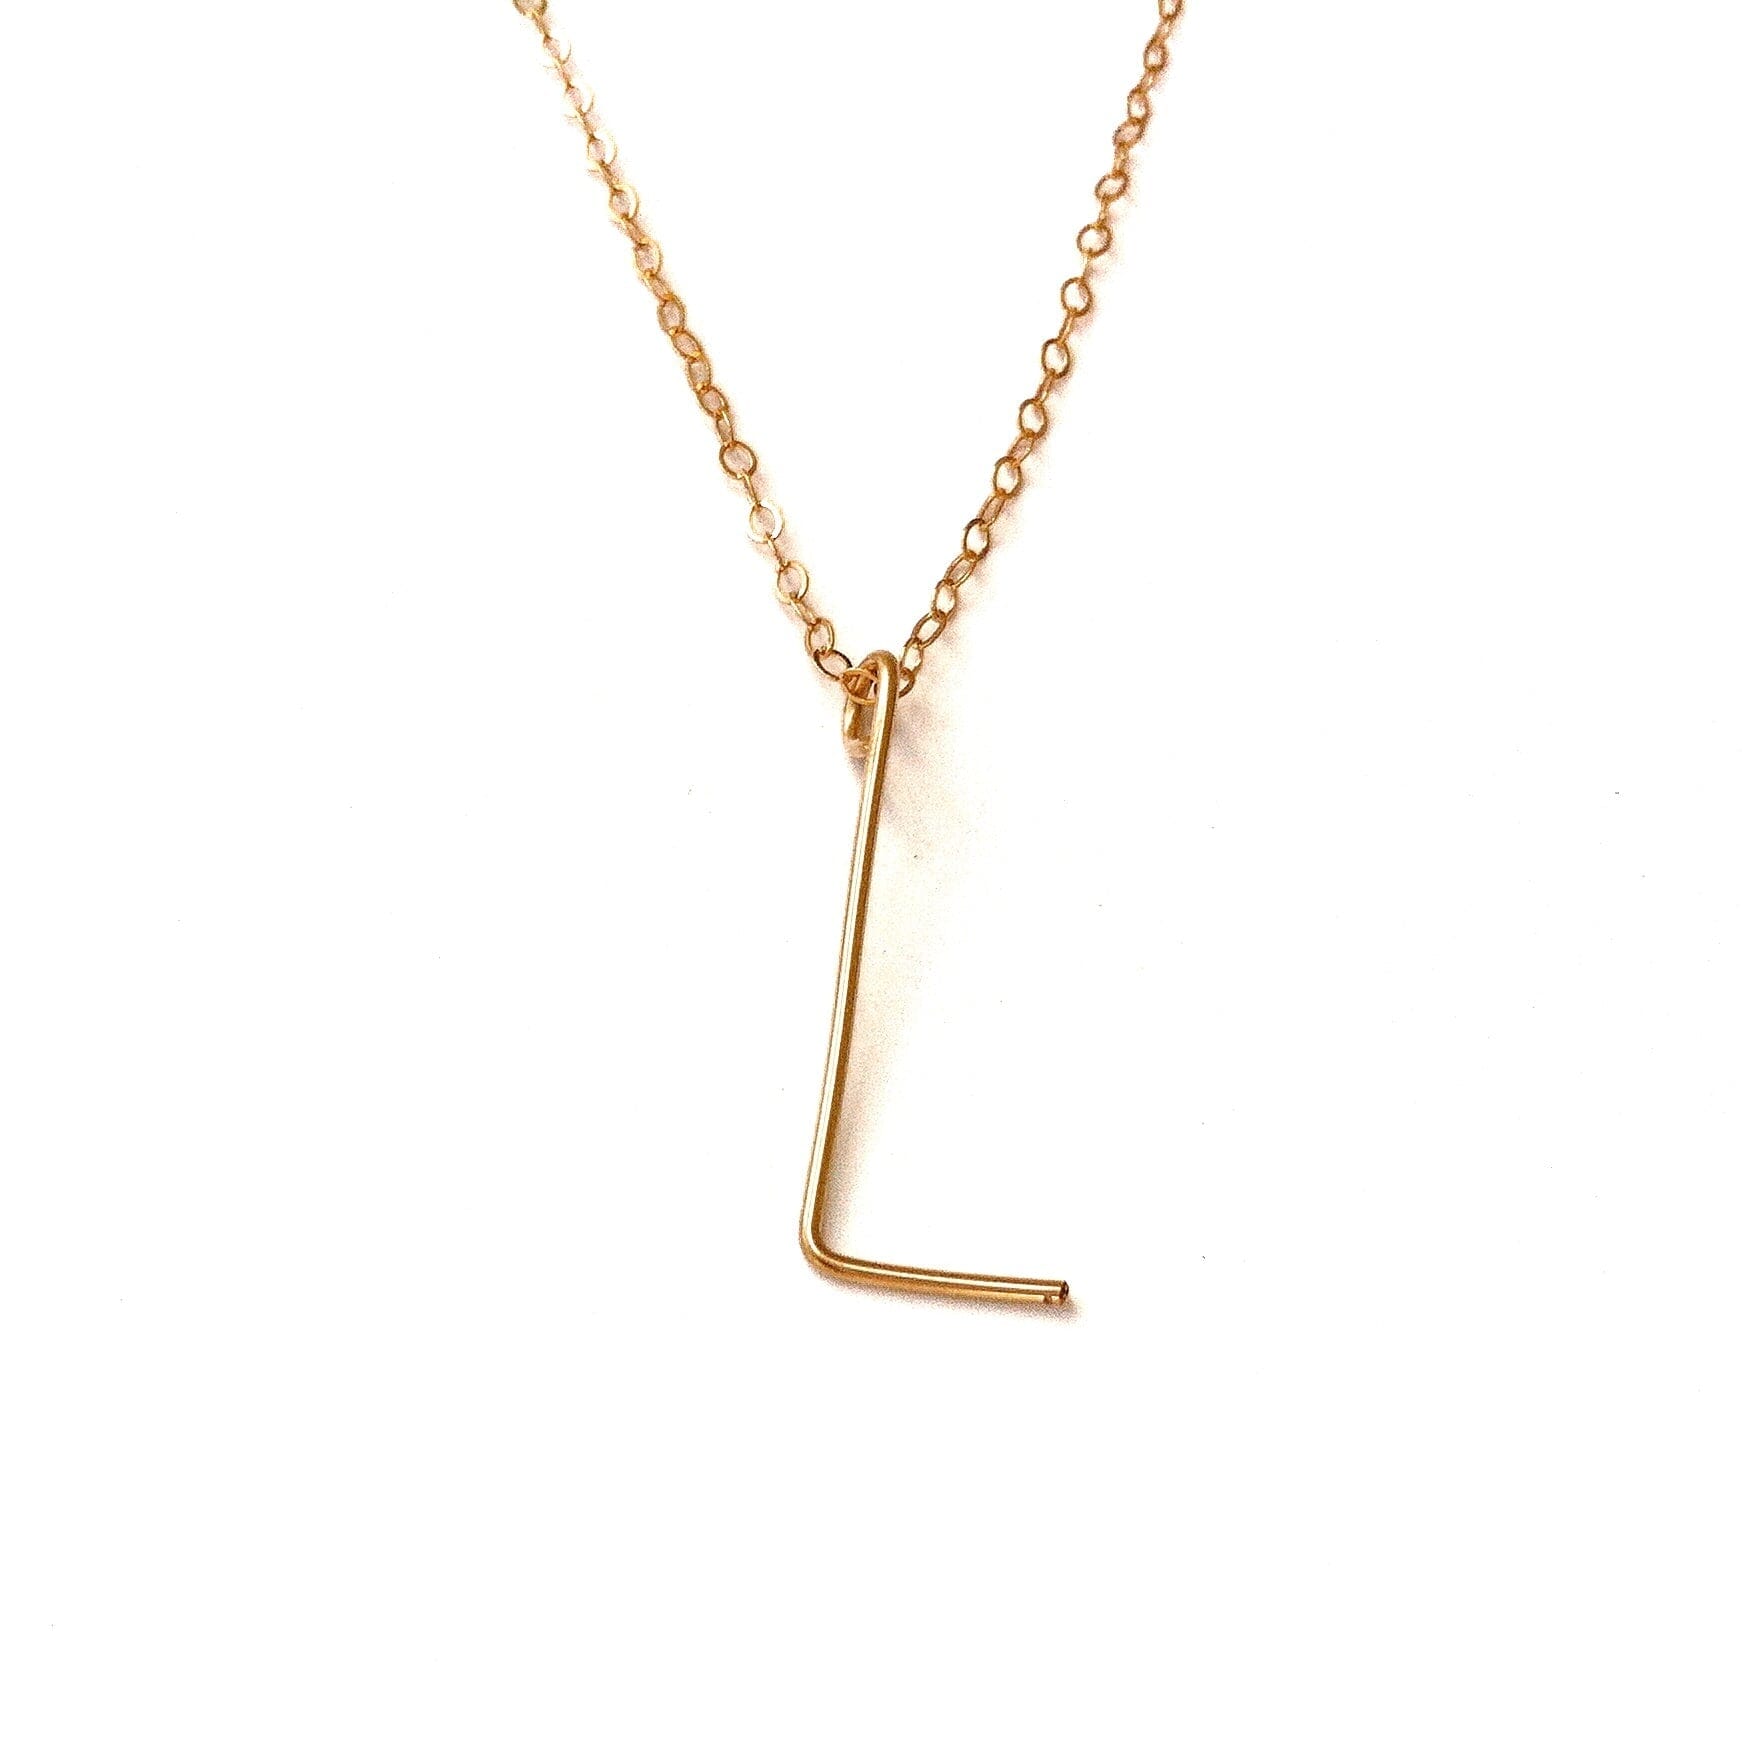 Handmade Initial Necklace Robyn Canady L 14K Gold Filled 